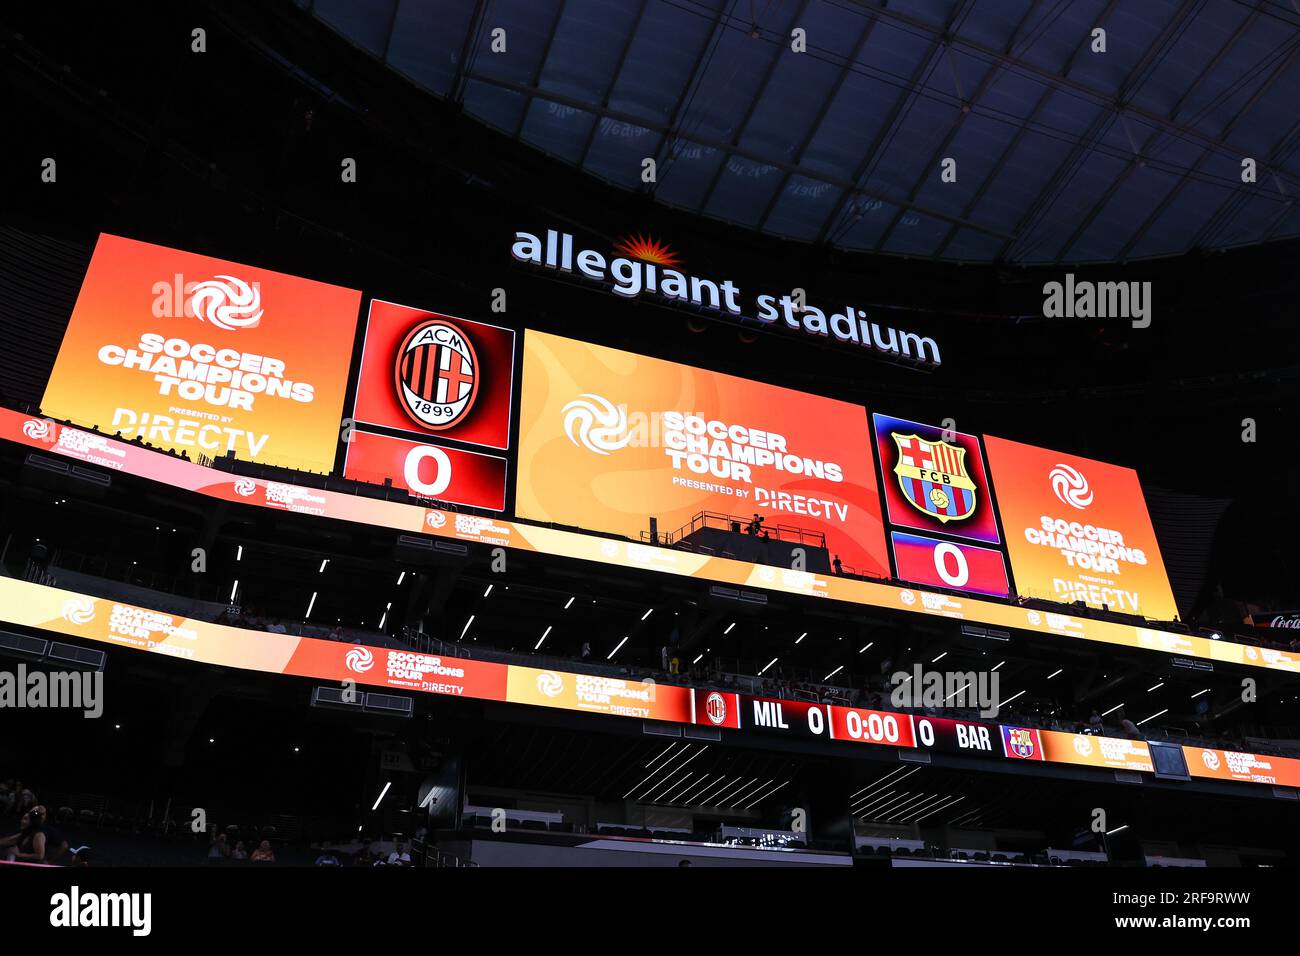 August 1, 2023: General interior photos taken during the 2023 Soccer Champions Tour featuring FC Barcelona vs AC Milan at Allegiant Stadium on August 1, 2023 in Las Vegas, NV. Christopher Trim/CSM. Stock Photo